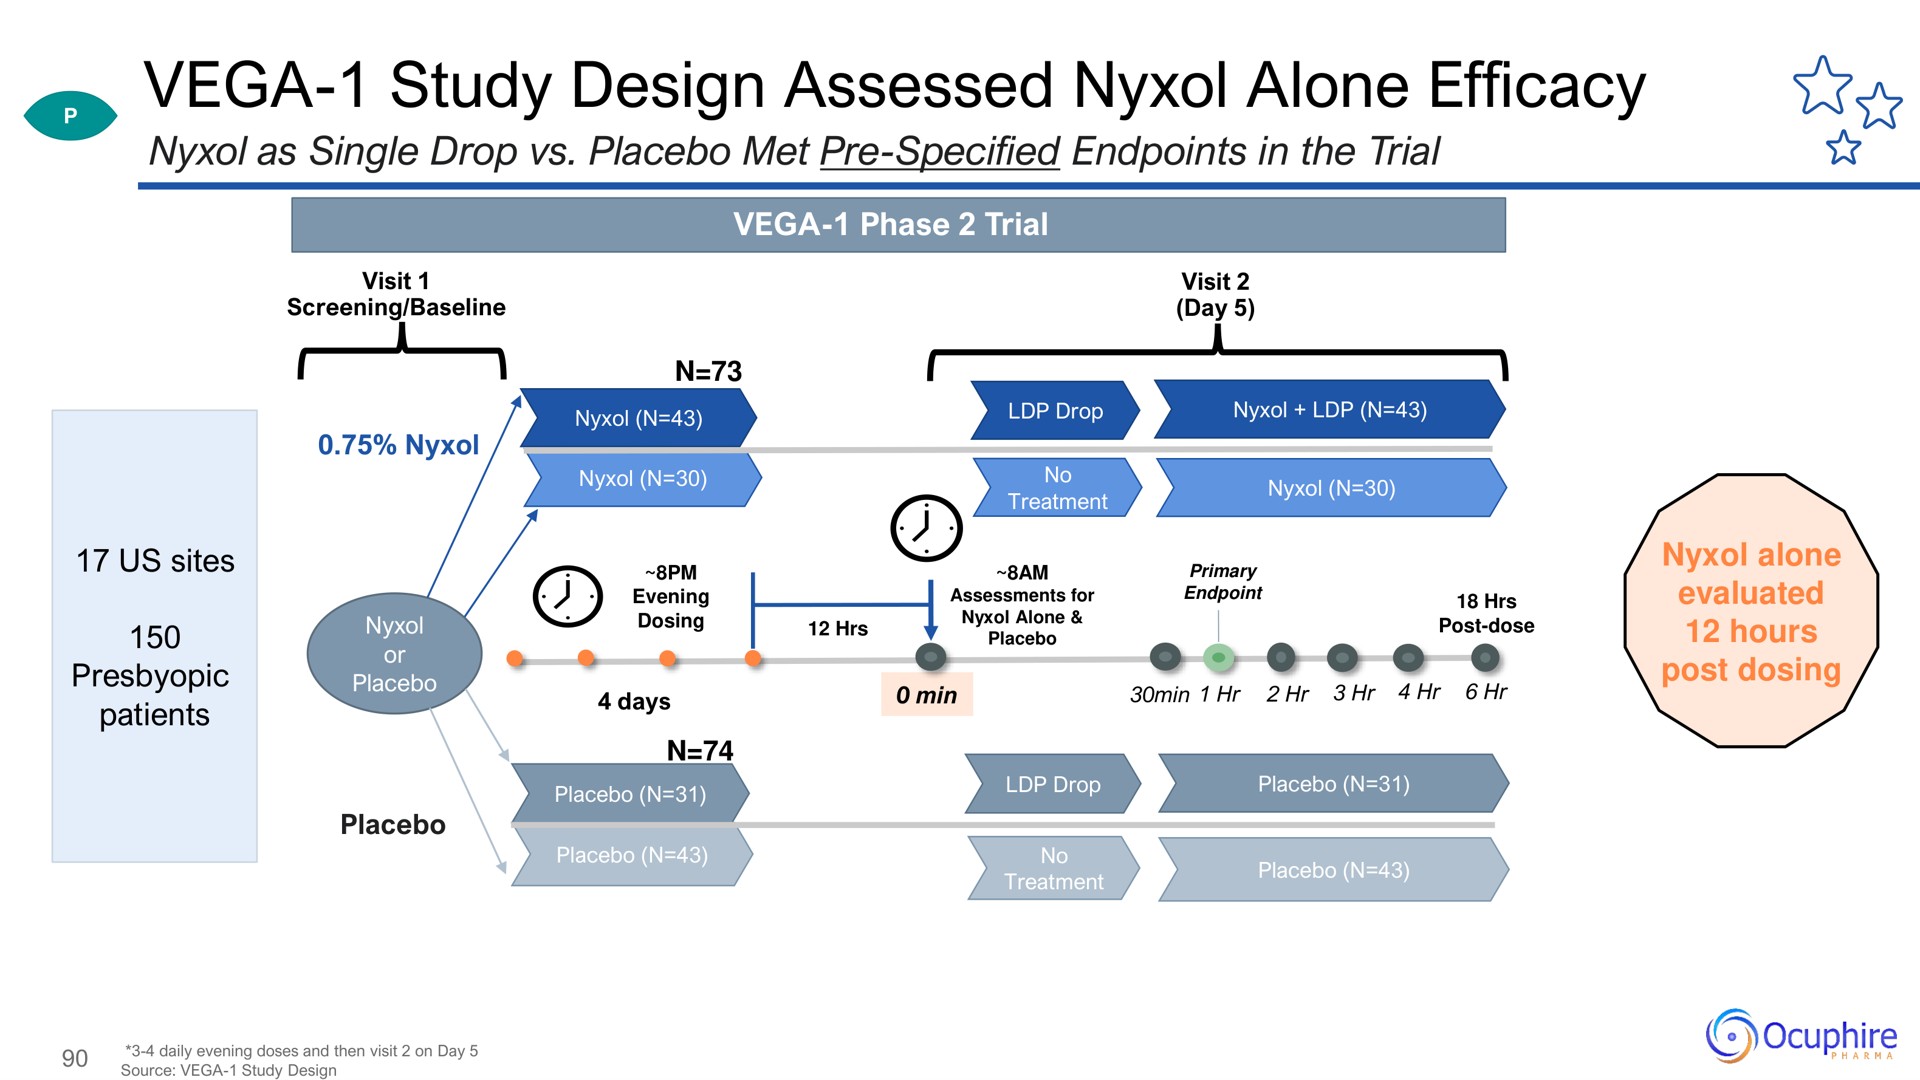 study design assessed alone efficacy ace | Ocuphire Pharma